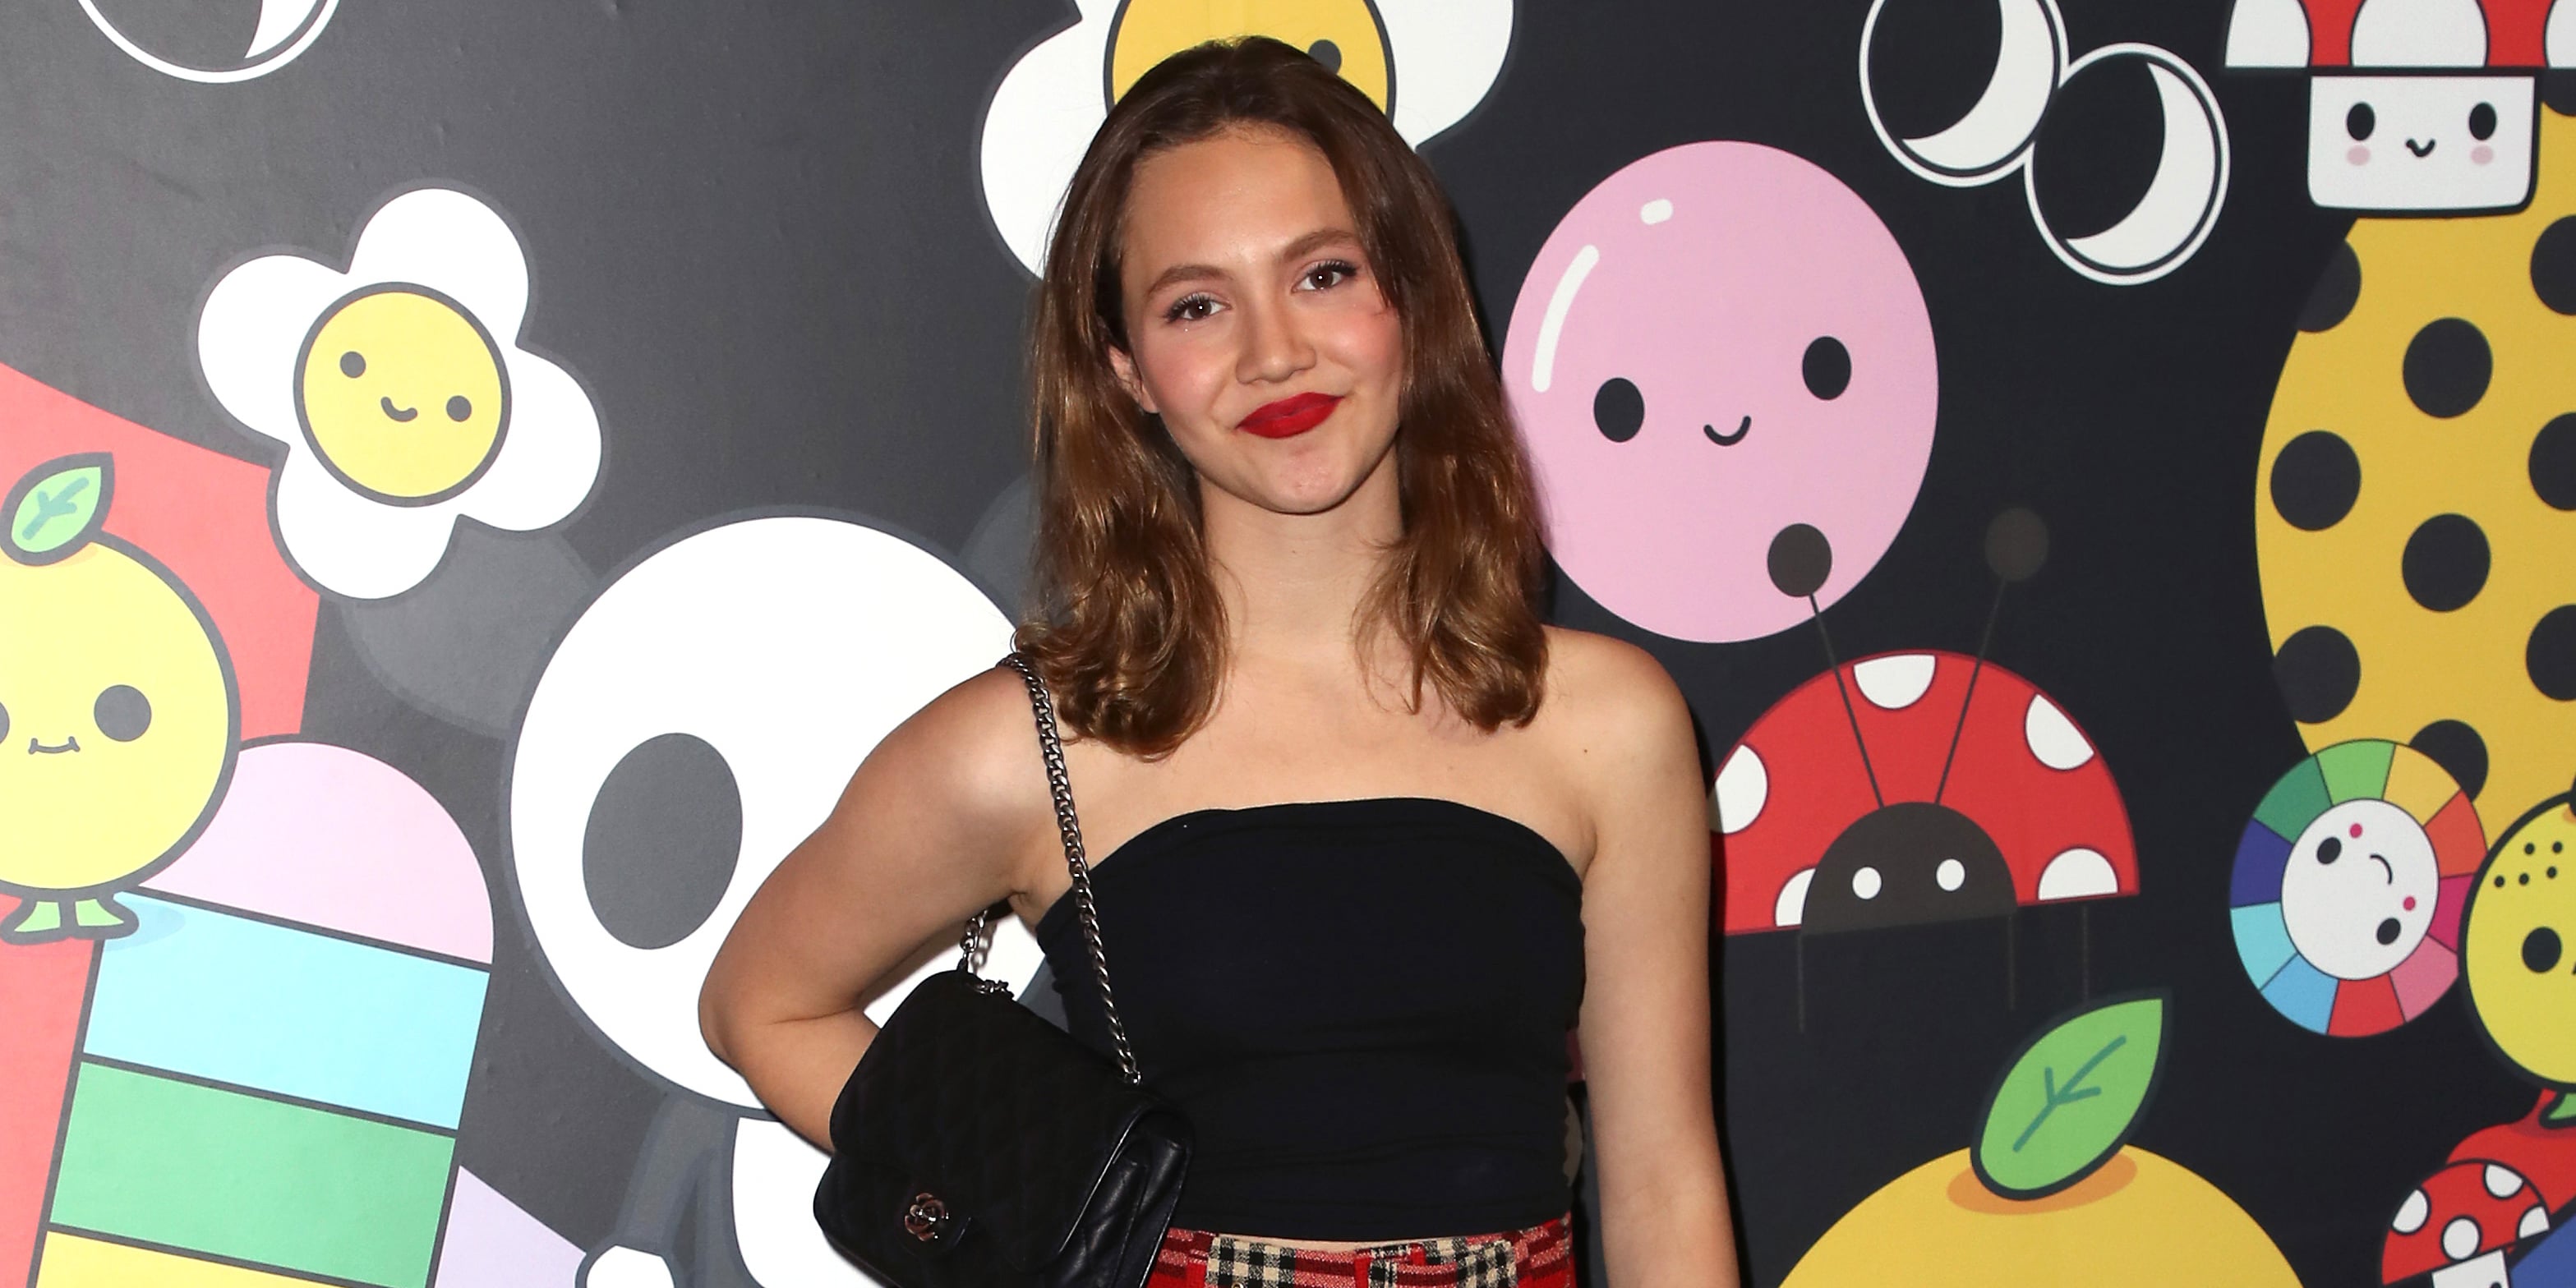 Iris Apatow's Best Outfits on Instagram